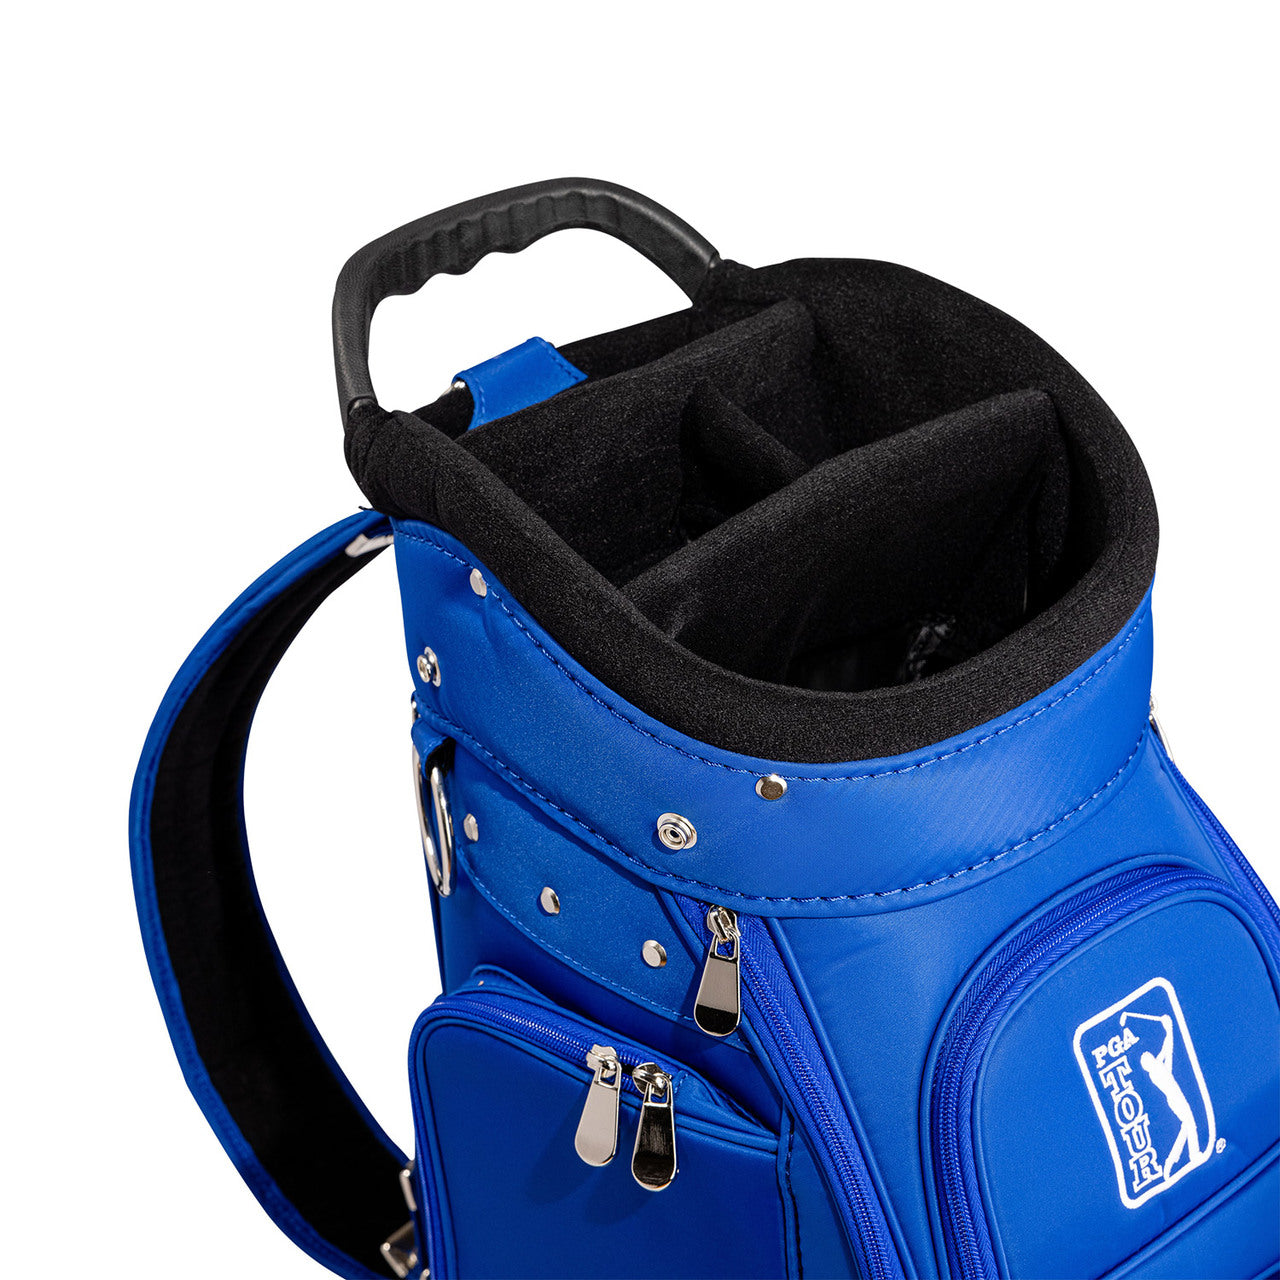 PGA Tour Golf Bag Blue with Travel Cover and Shark Wheels